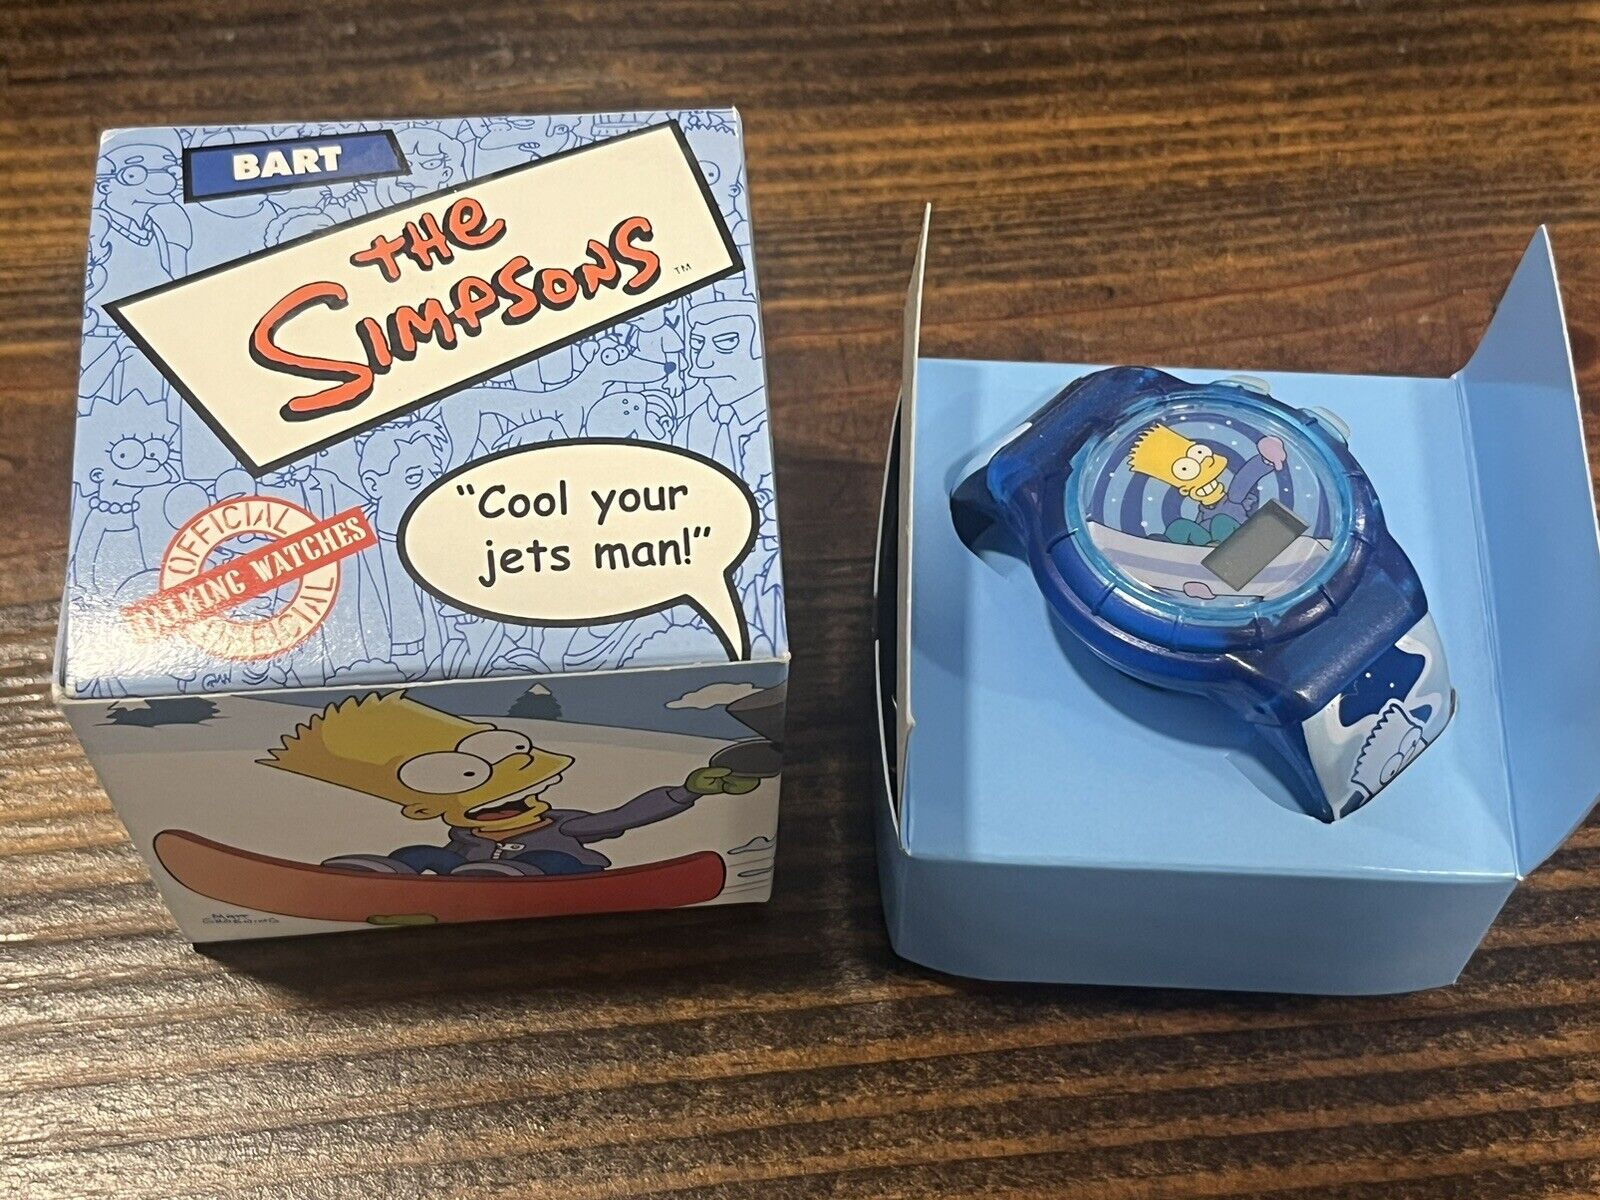 Bart Simpson, The Simpsons, Talking Watch NEW In Box 2002 Burger King